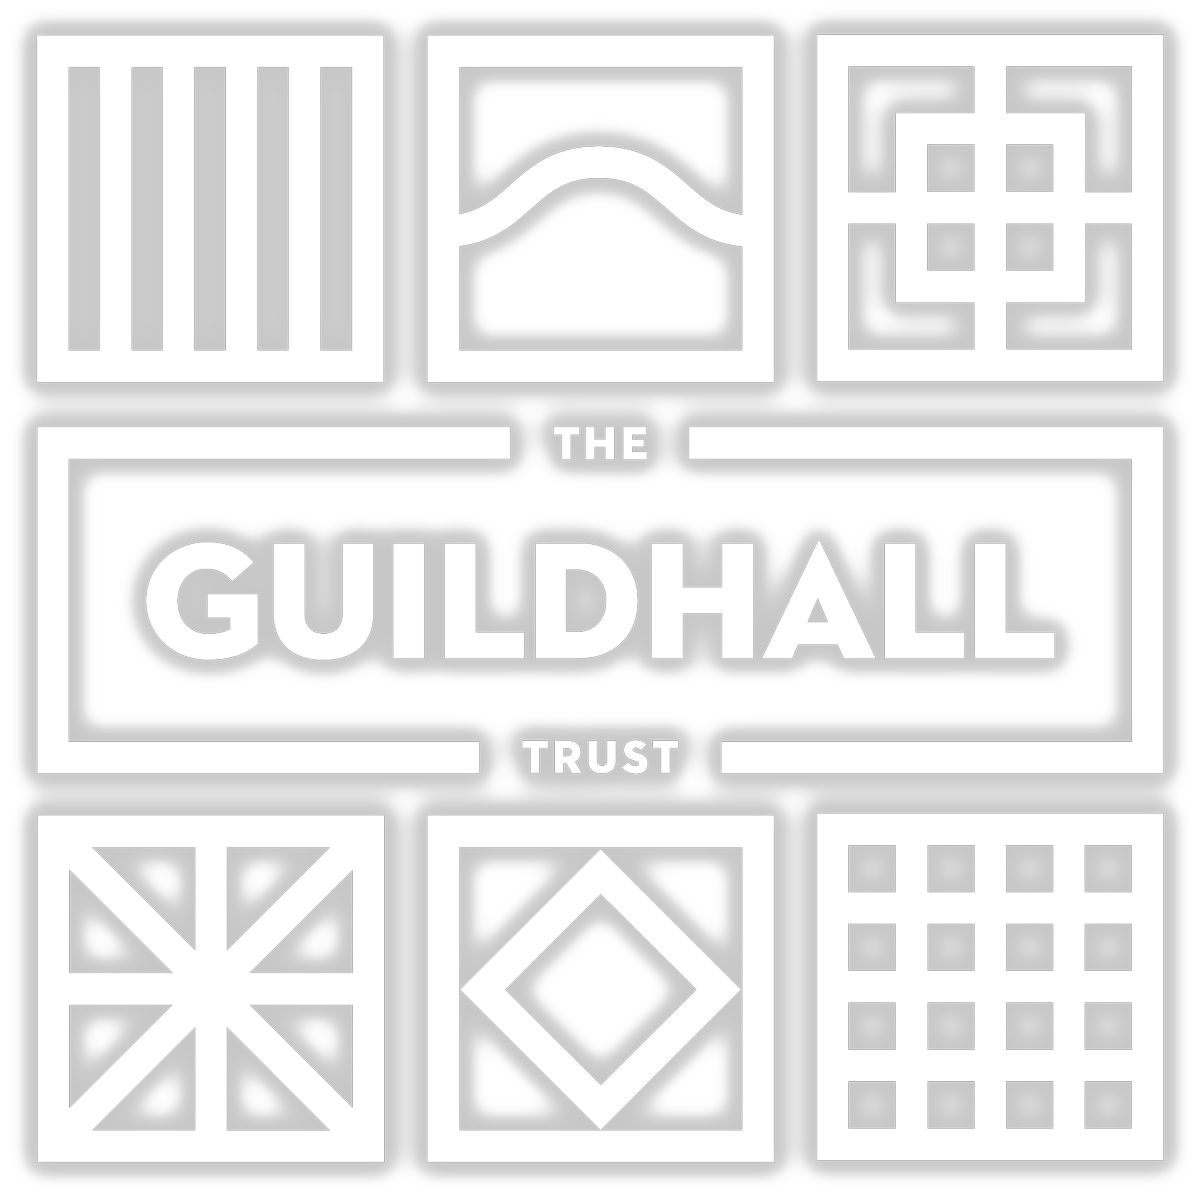 Logo for the Guildhall Trust.